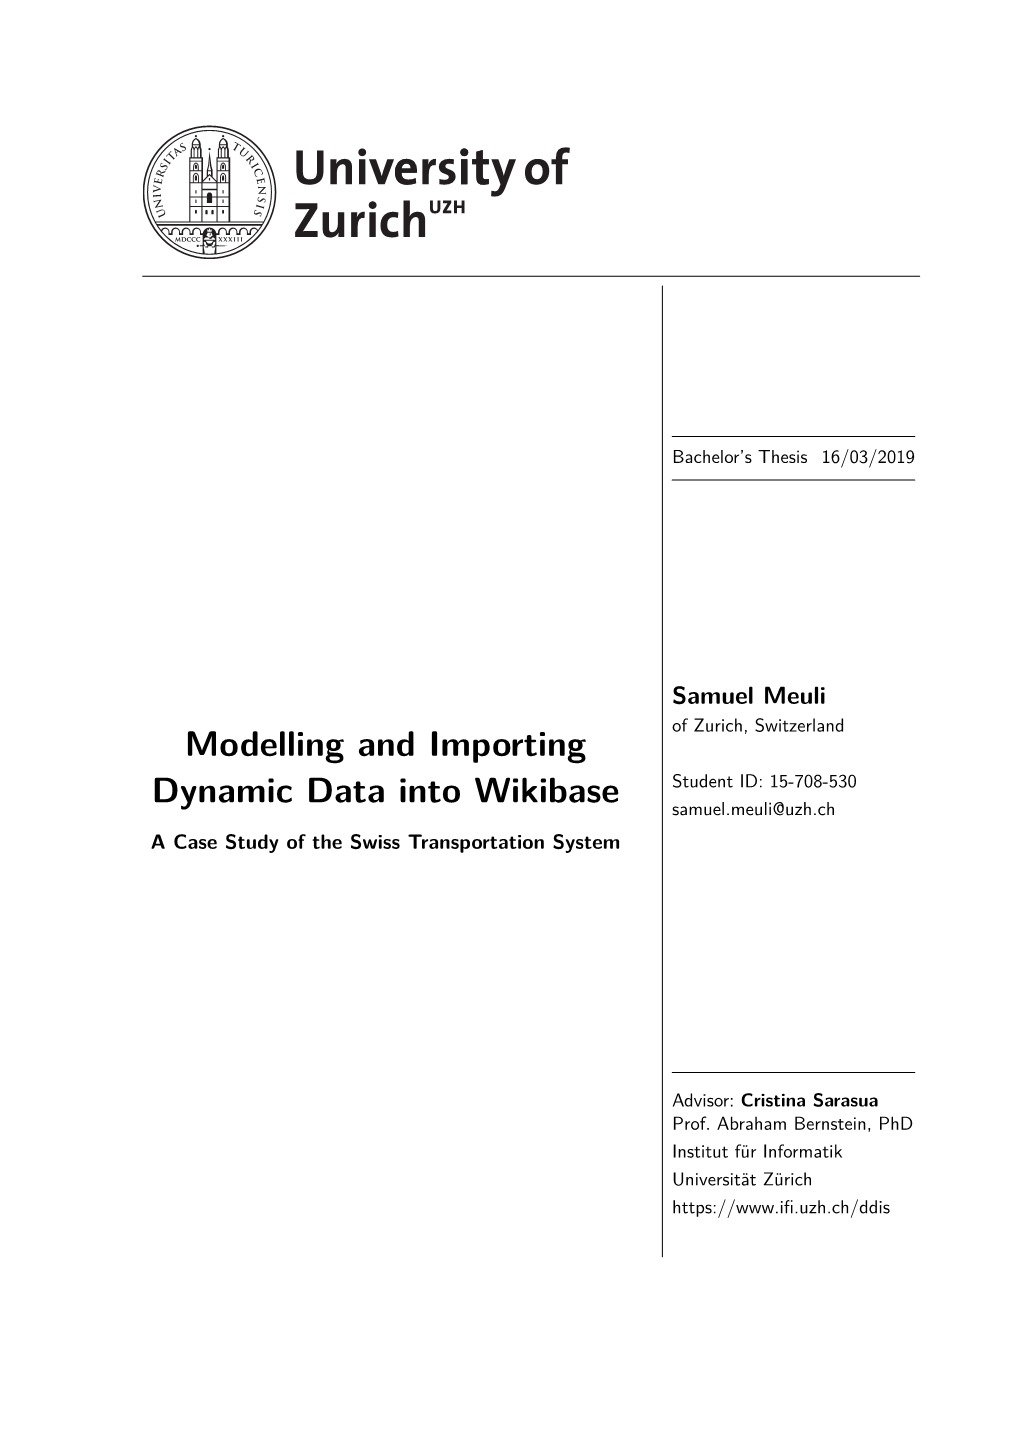 Modelling and Importing Dynamic Data Into Wikibase Student ID: 15-708-530 Samuel.Meuli@Uzh.Ch a Case Study of the Swiss Transportation System